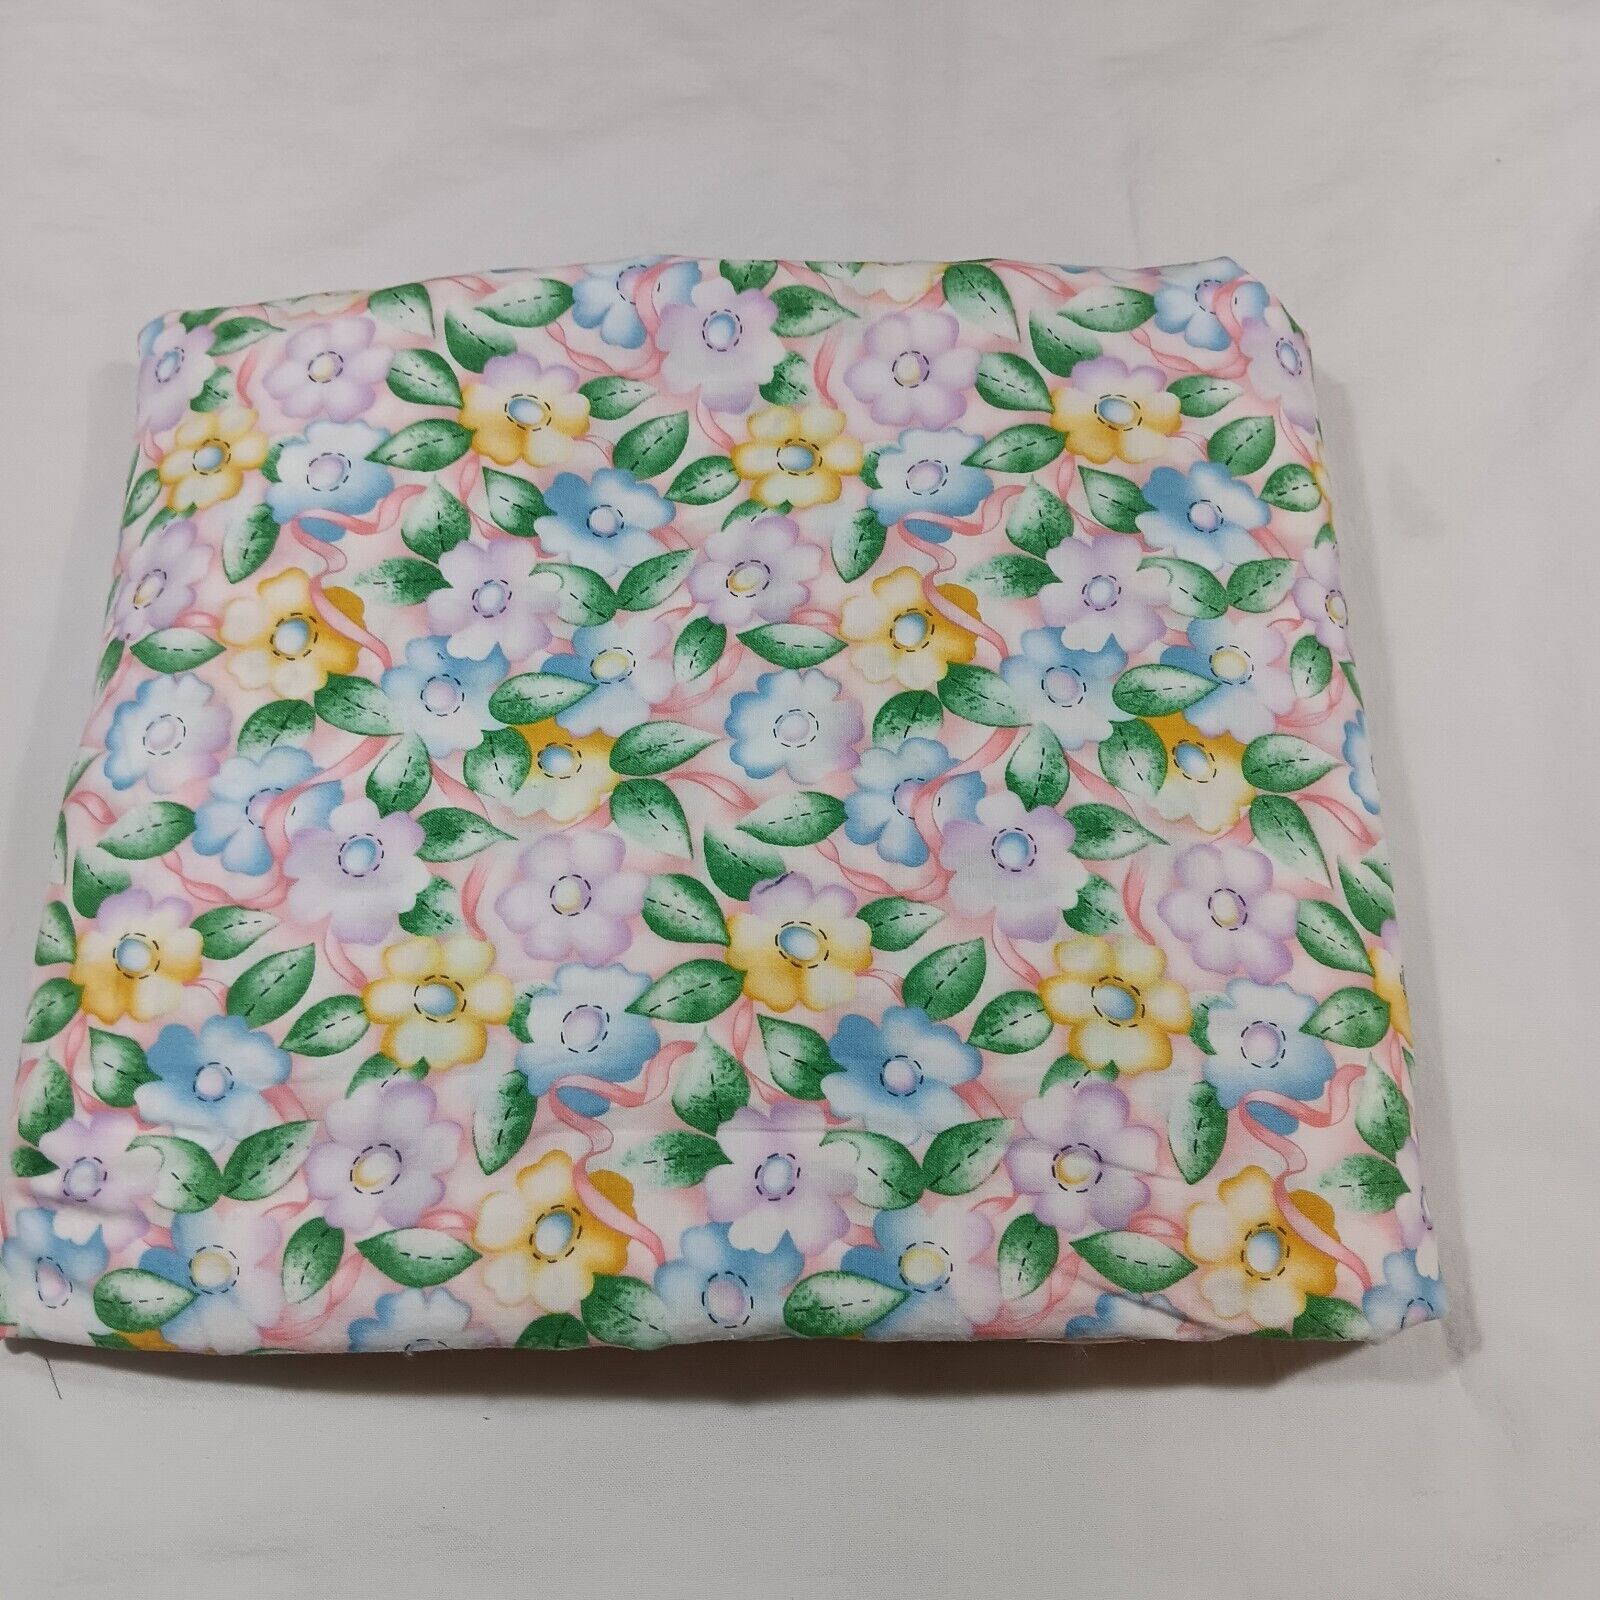 Vintage Peter Pan Fabric Inc Lot of 4 yards Pink Blue Floral Cotton Quilt Fabric